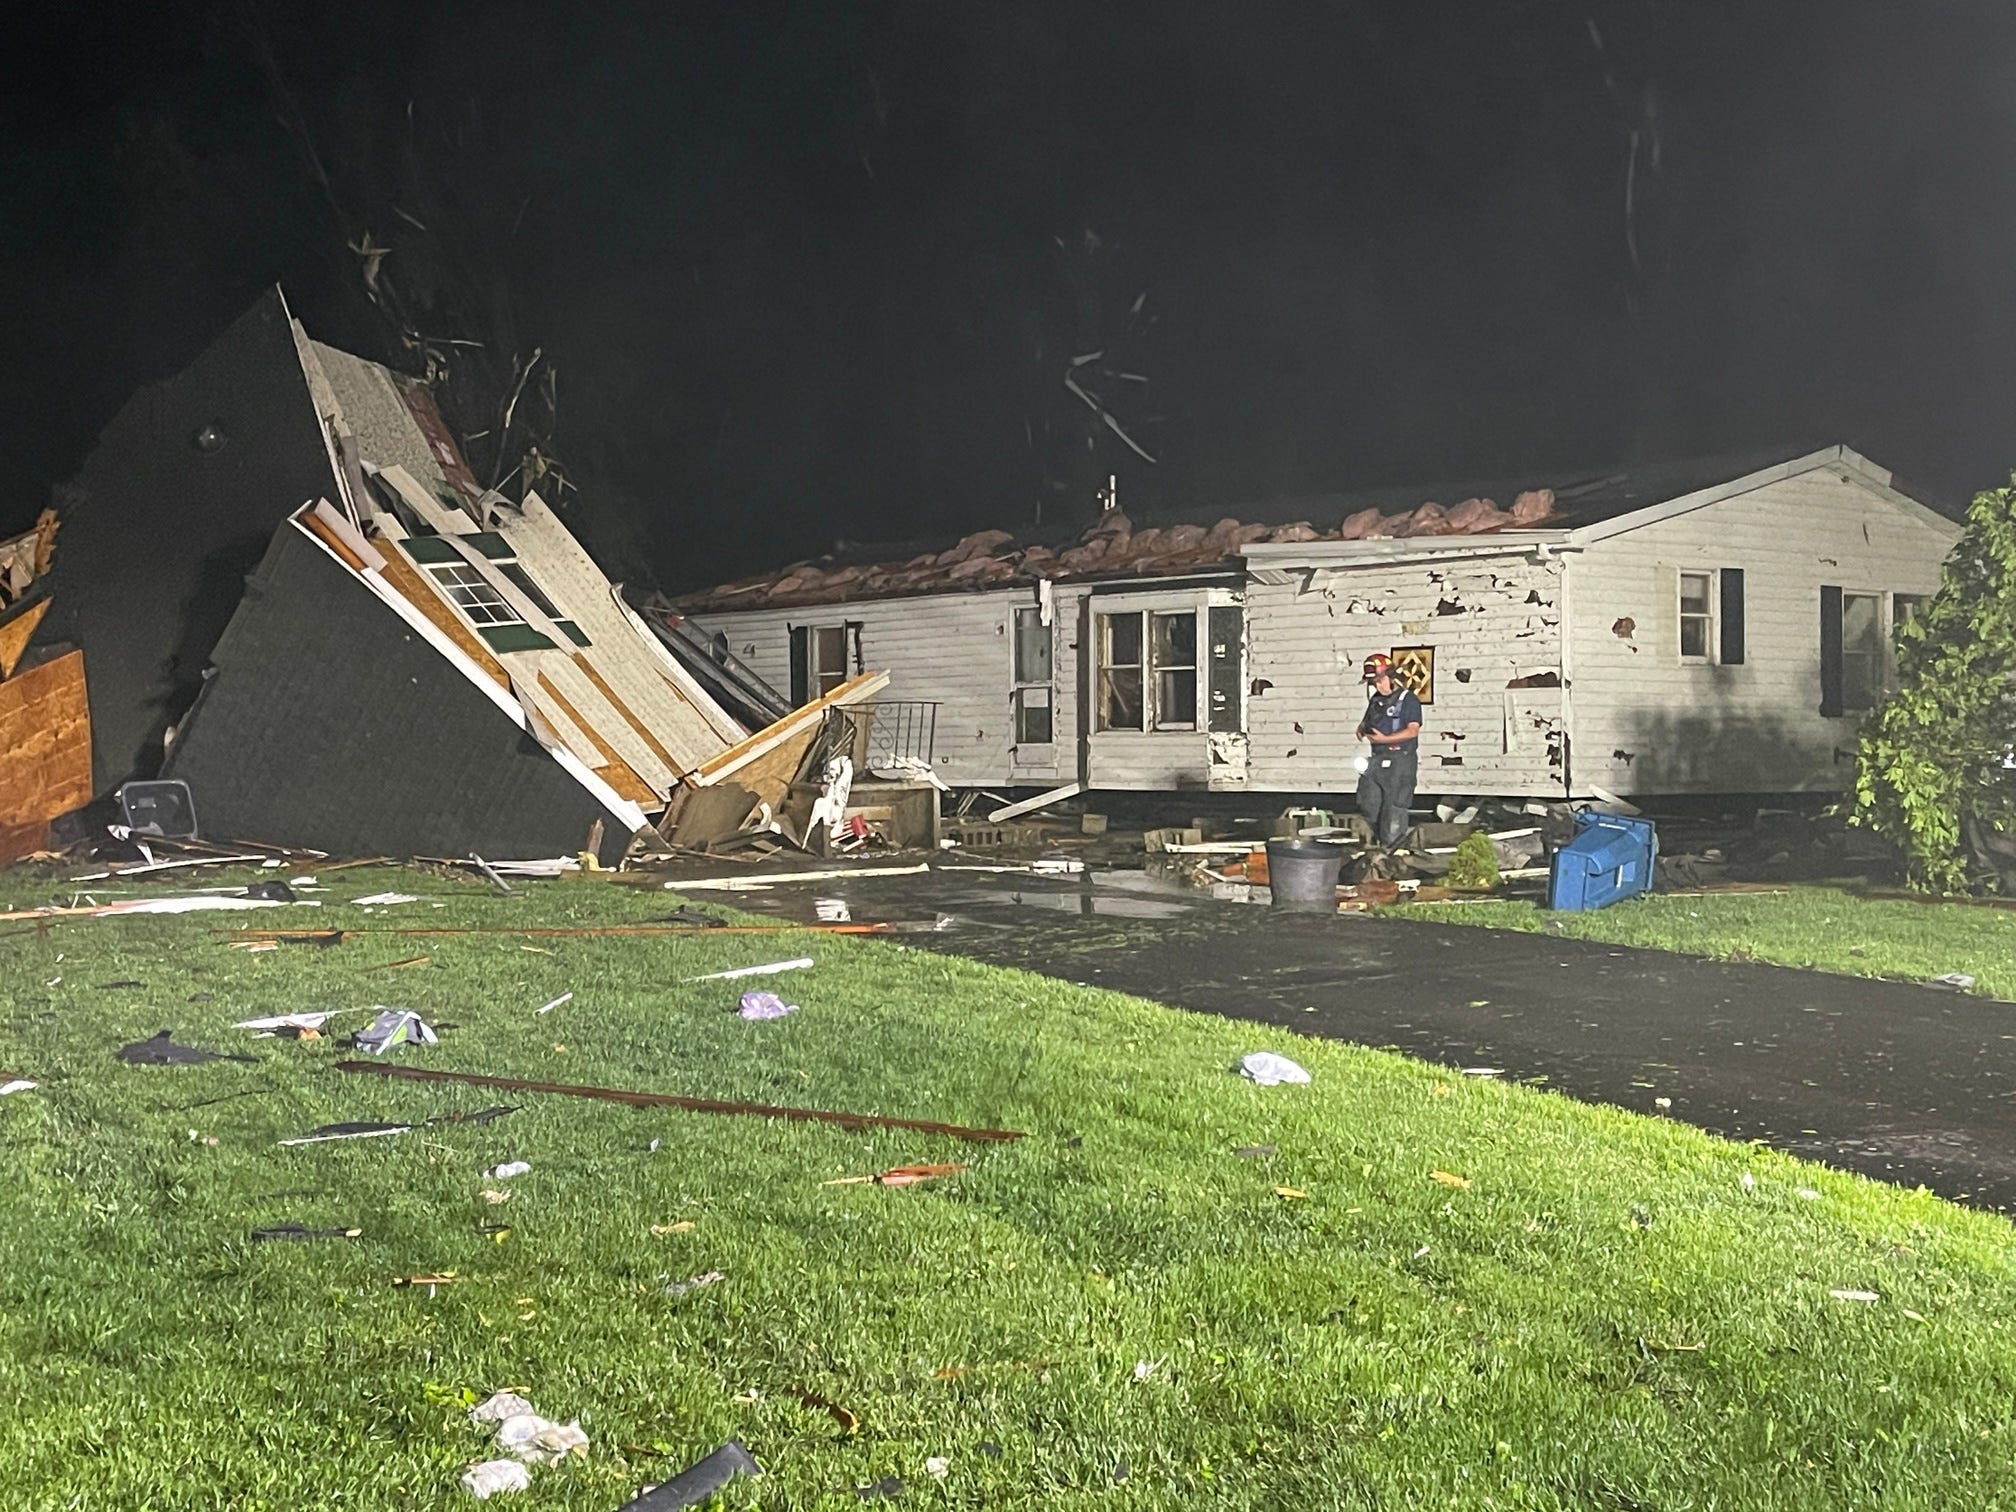 State of emergency after tornadoes strike West Michigan [Video]